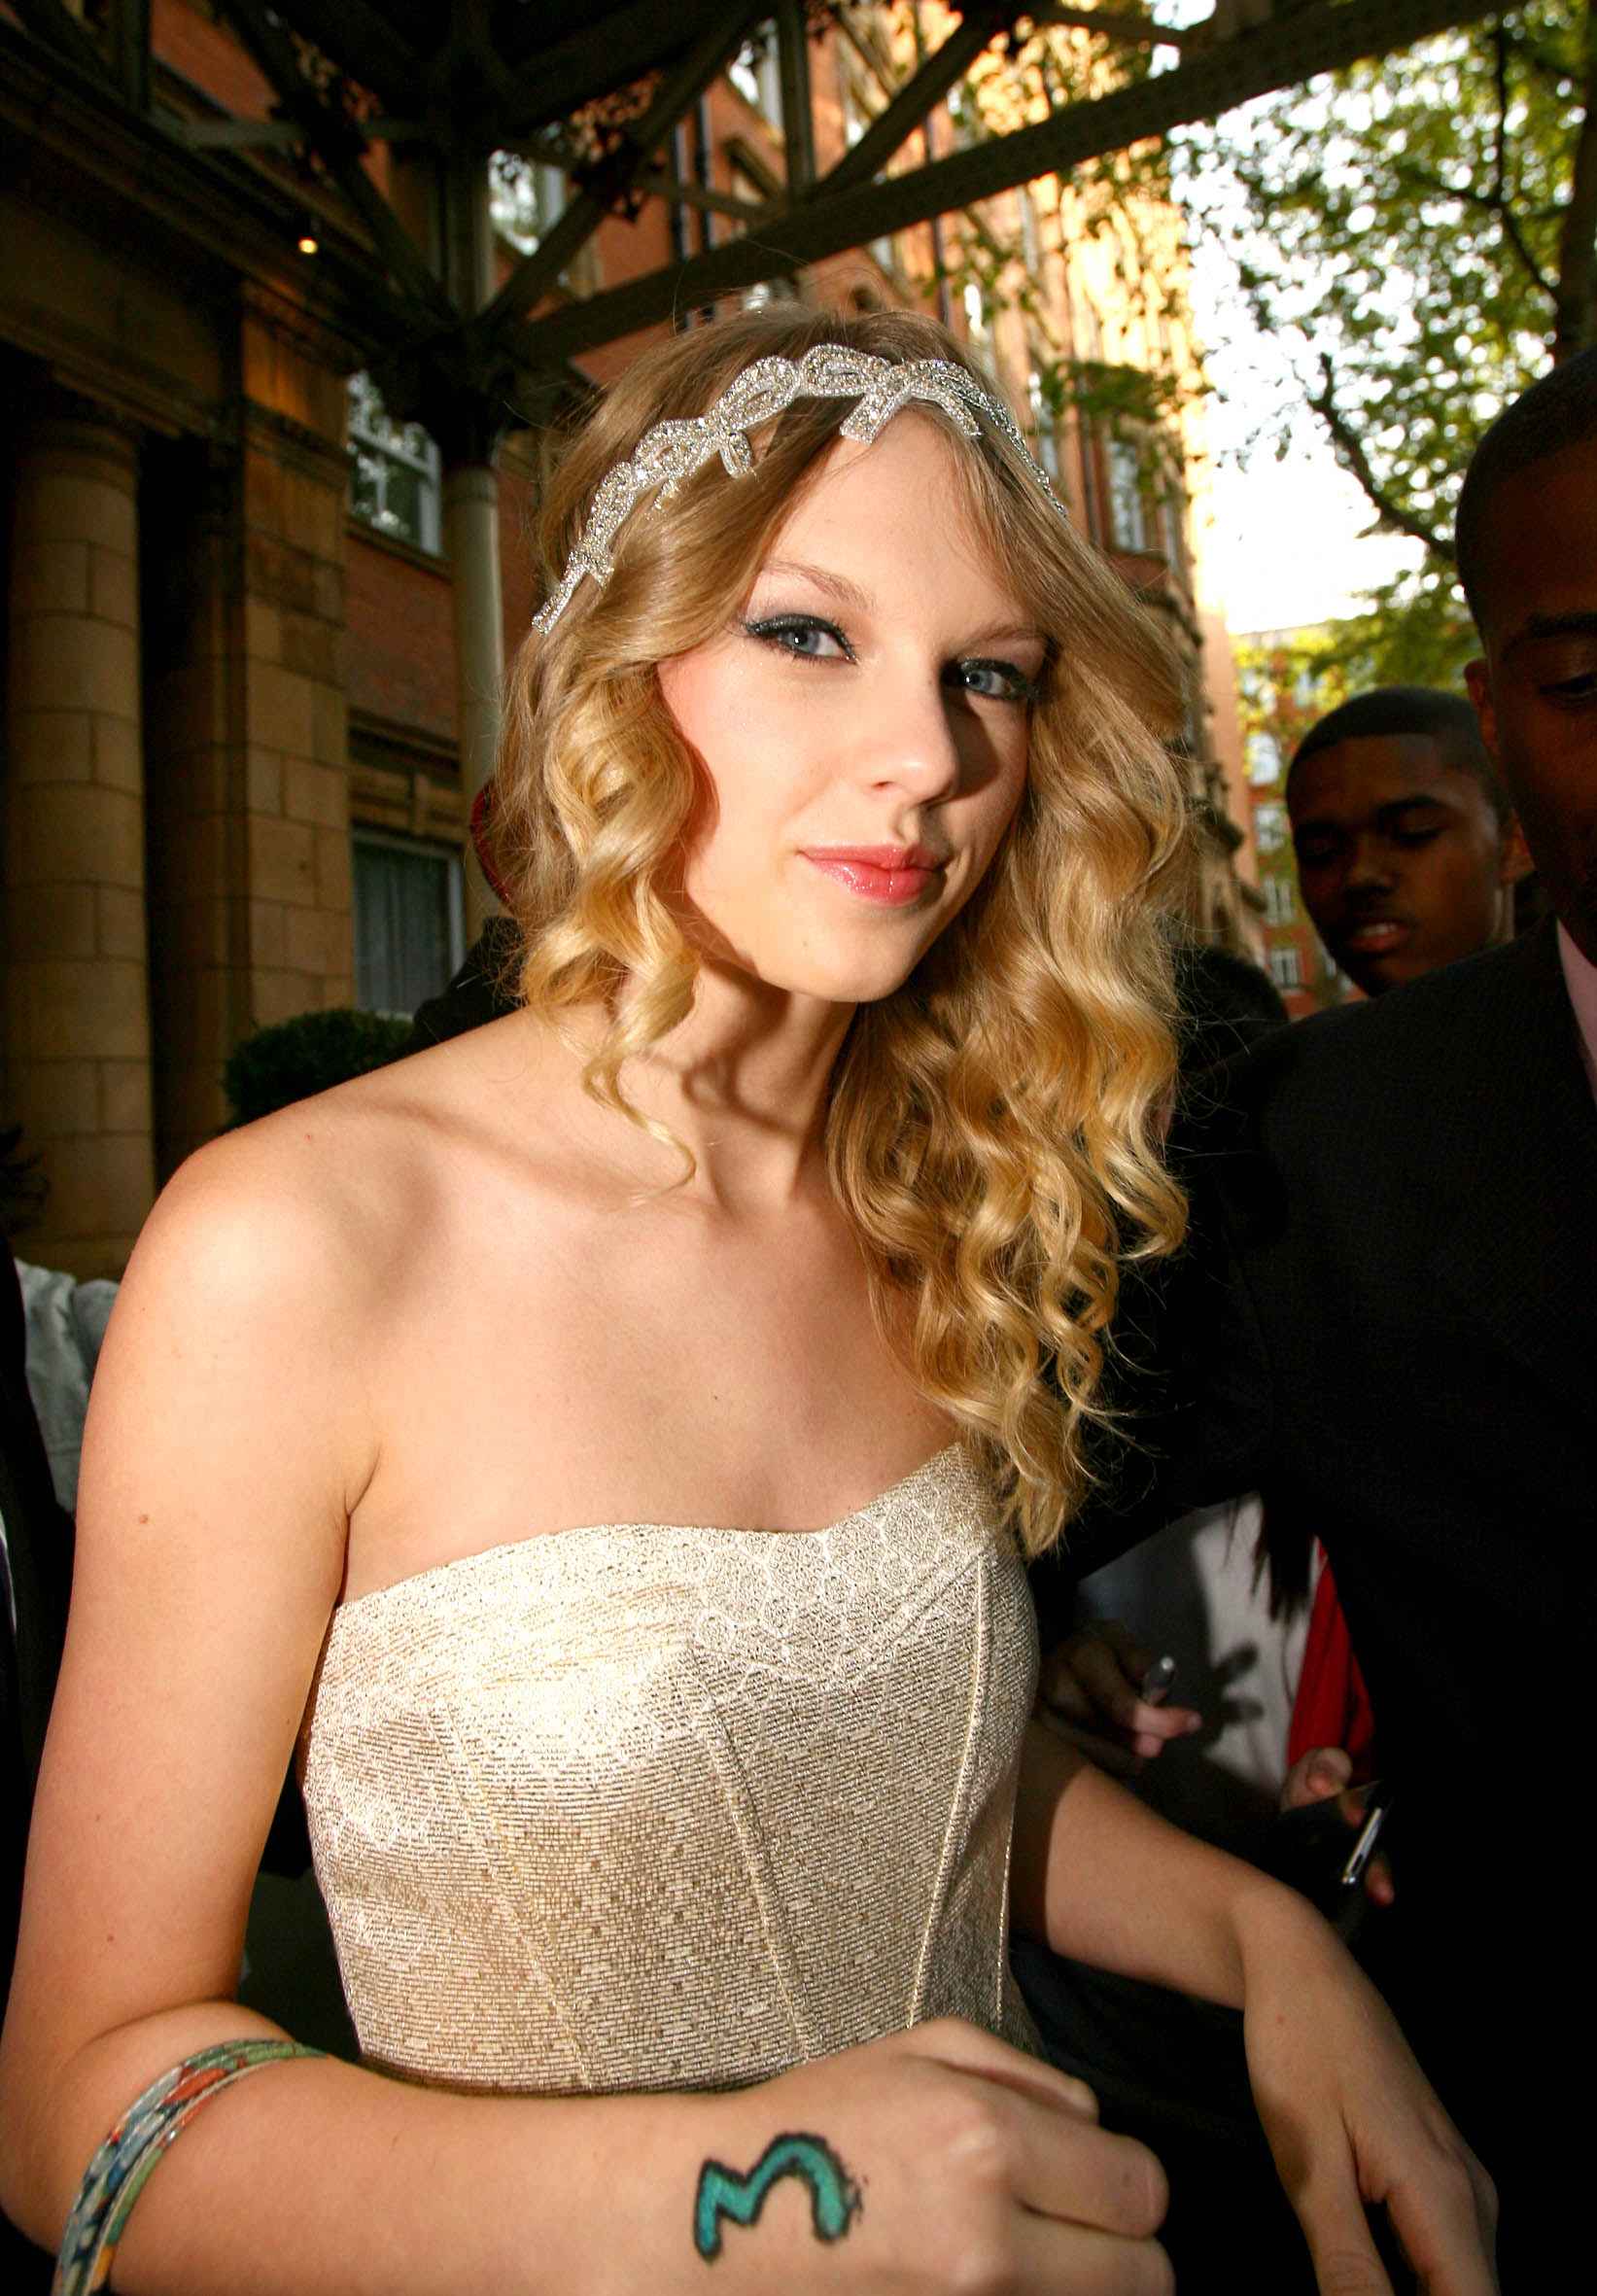 Taylor Swift Heading to BBC Studios in London May 2009 | TAYLOR SWIFT INDONESIA1643 x 2362